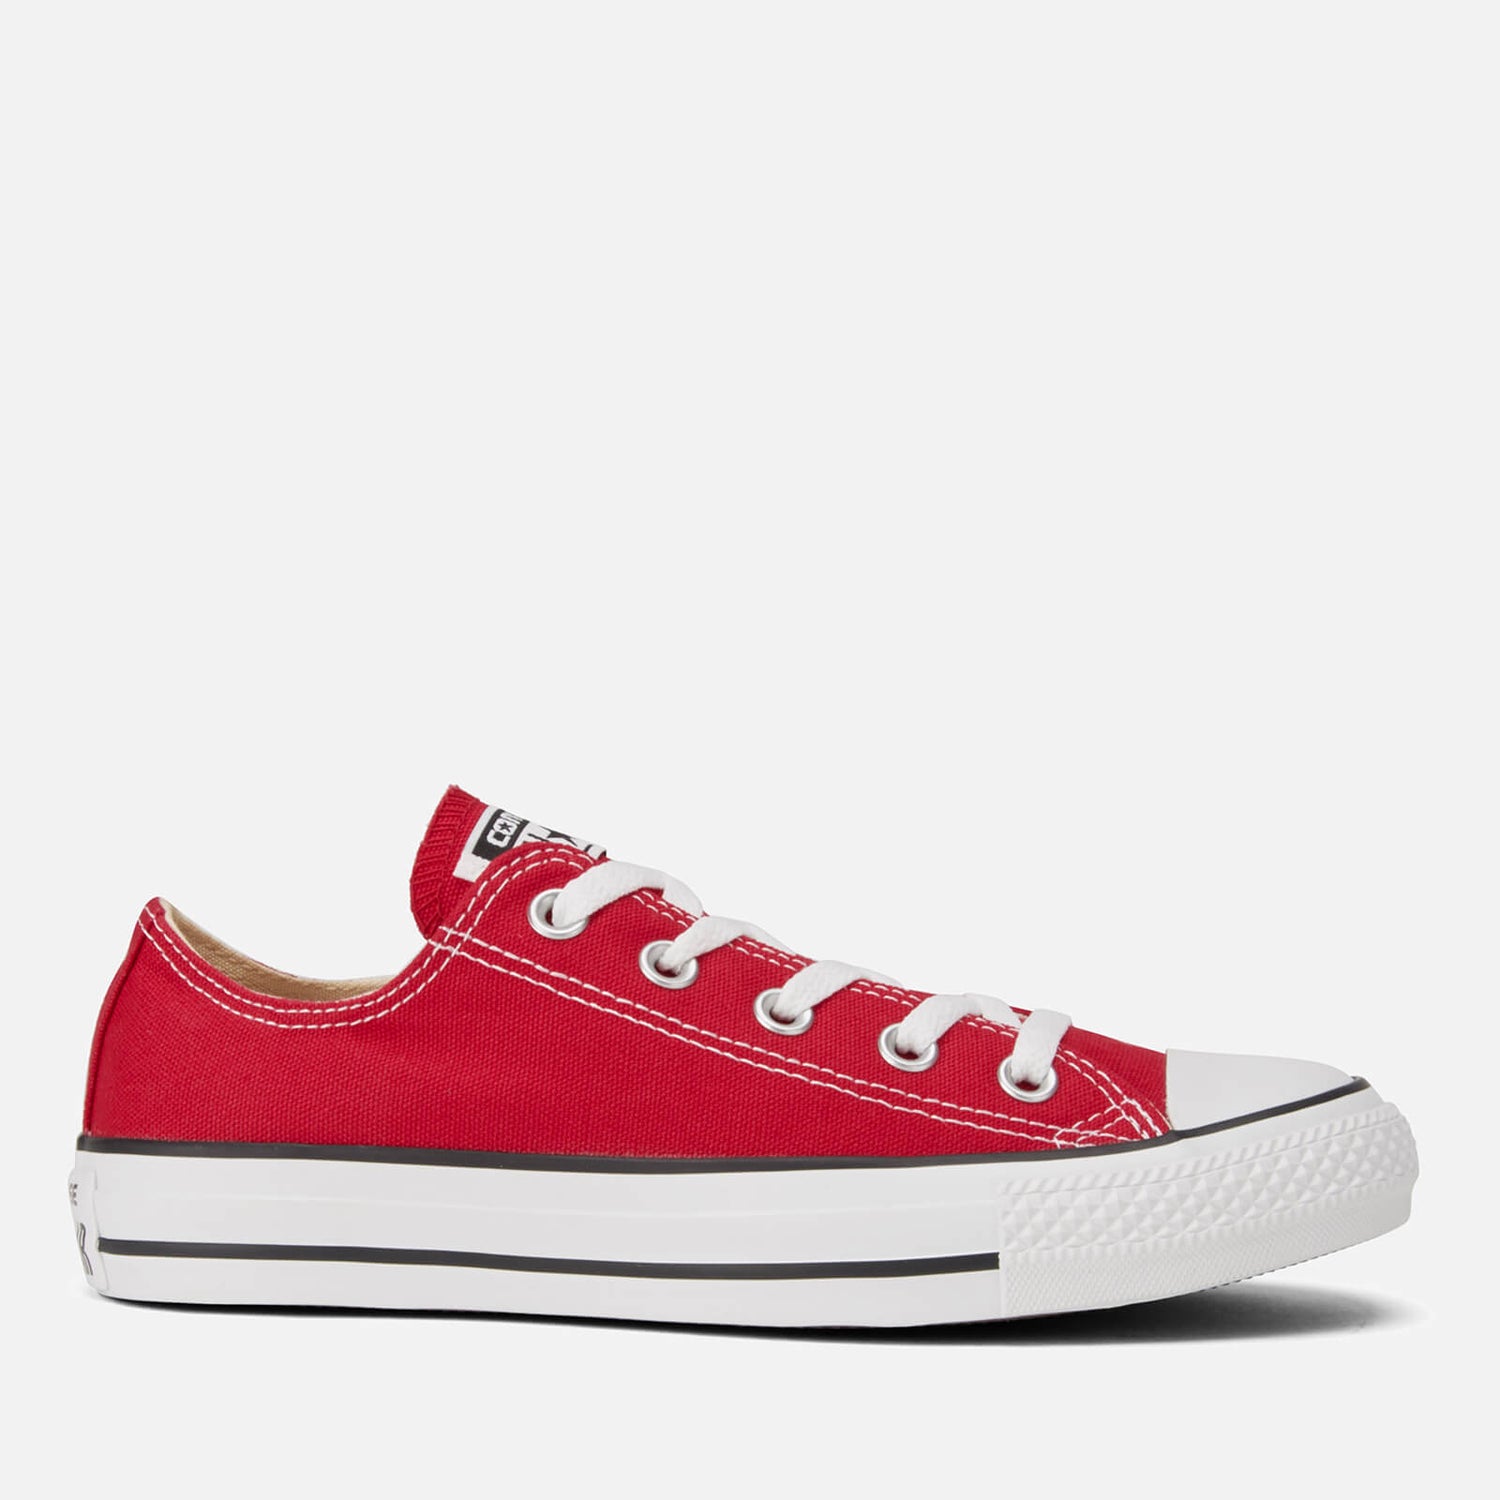 Converse Chuck Taylor All Star Ox Canvas Trainers - Red